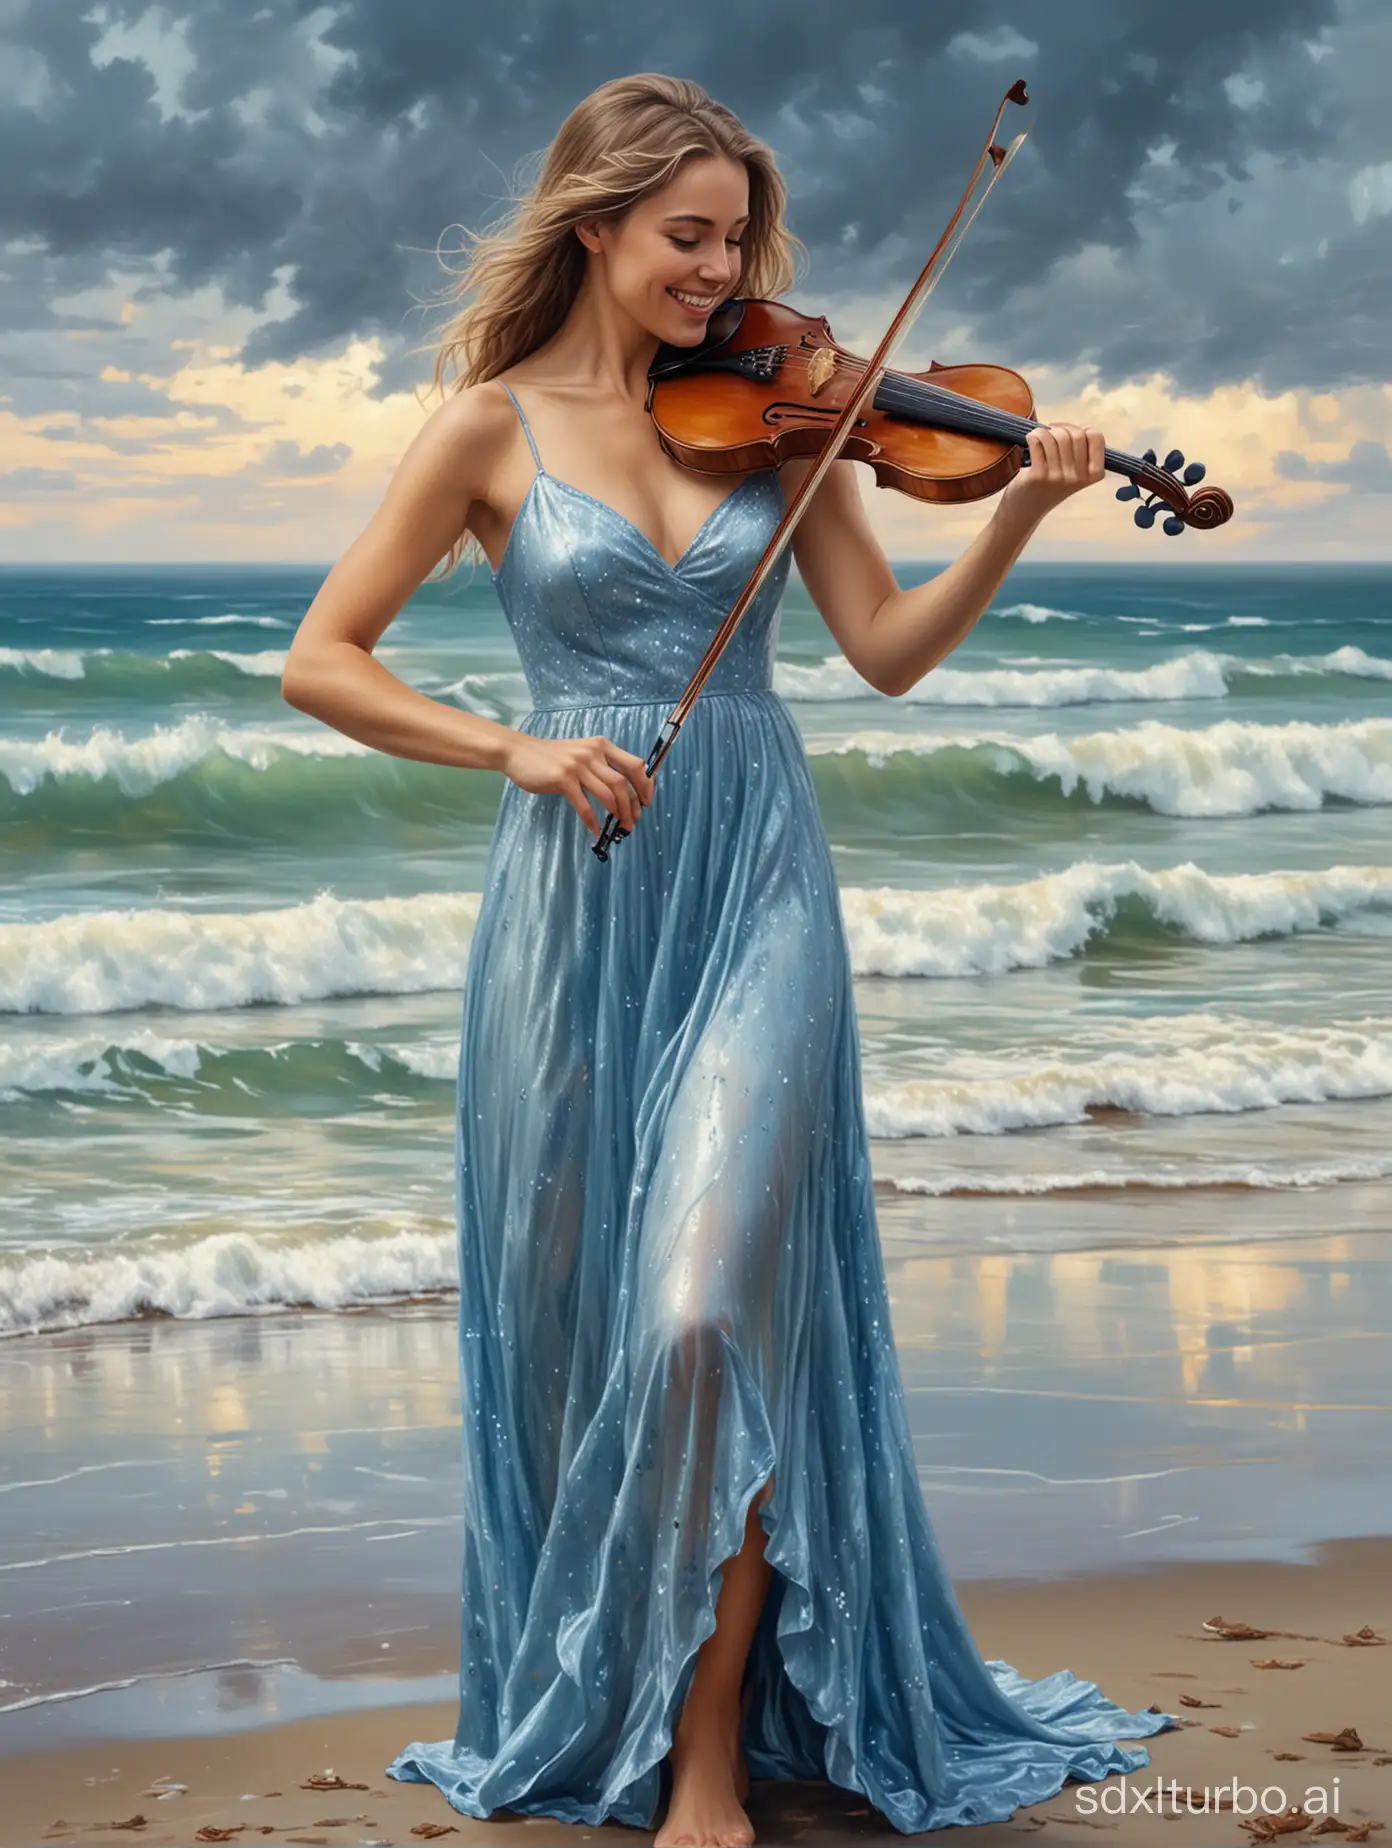 Imagine a 4k oil painting featuring full body beautiful caucasian woman, wearing a shimmery blue dress, sparkling, smiling beautifully, playing the violin, on the beach, cloudy atmosphere